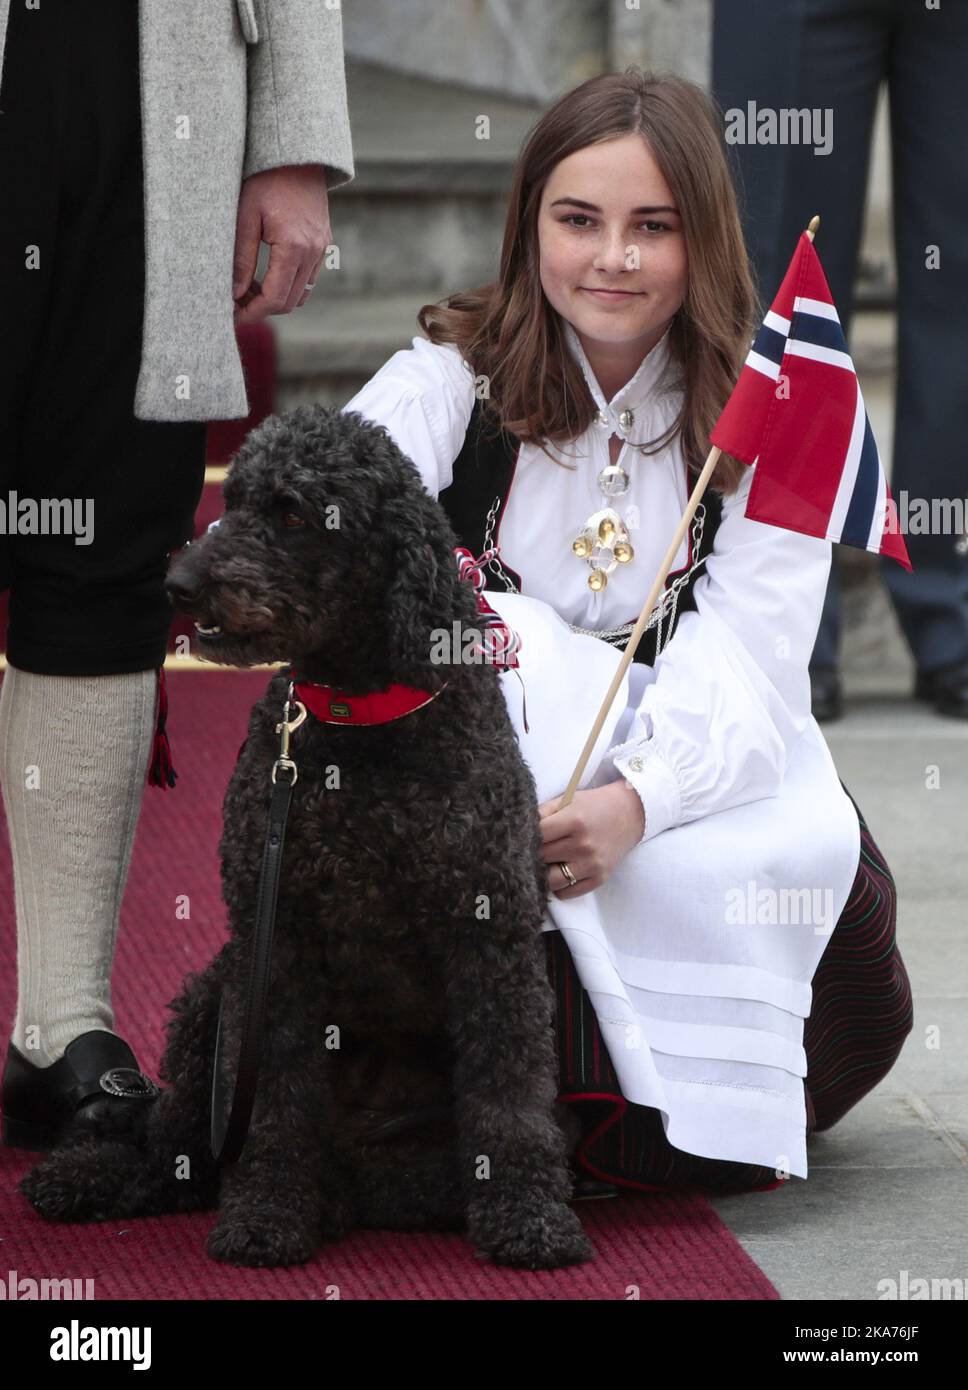 Princess Ingrid Alexandra of Norway and her dog Muffins Kraakebolle, outside their residence Skaugum in Asker, on May 17, 2019, attending the celebration of Norwegian National Day. Photo: Lise Aaserud / NTB scanpix  Stock Photo